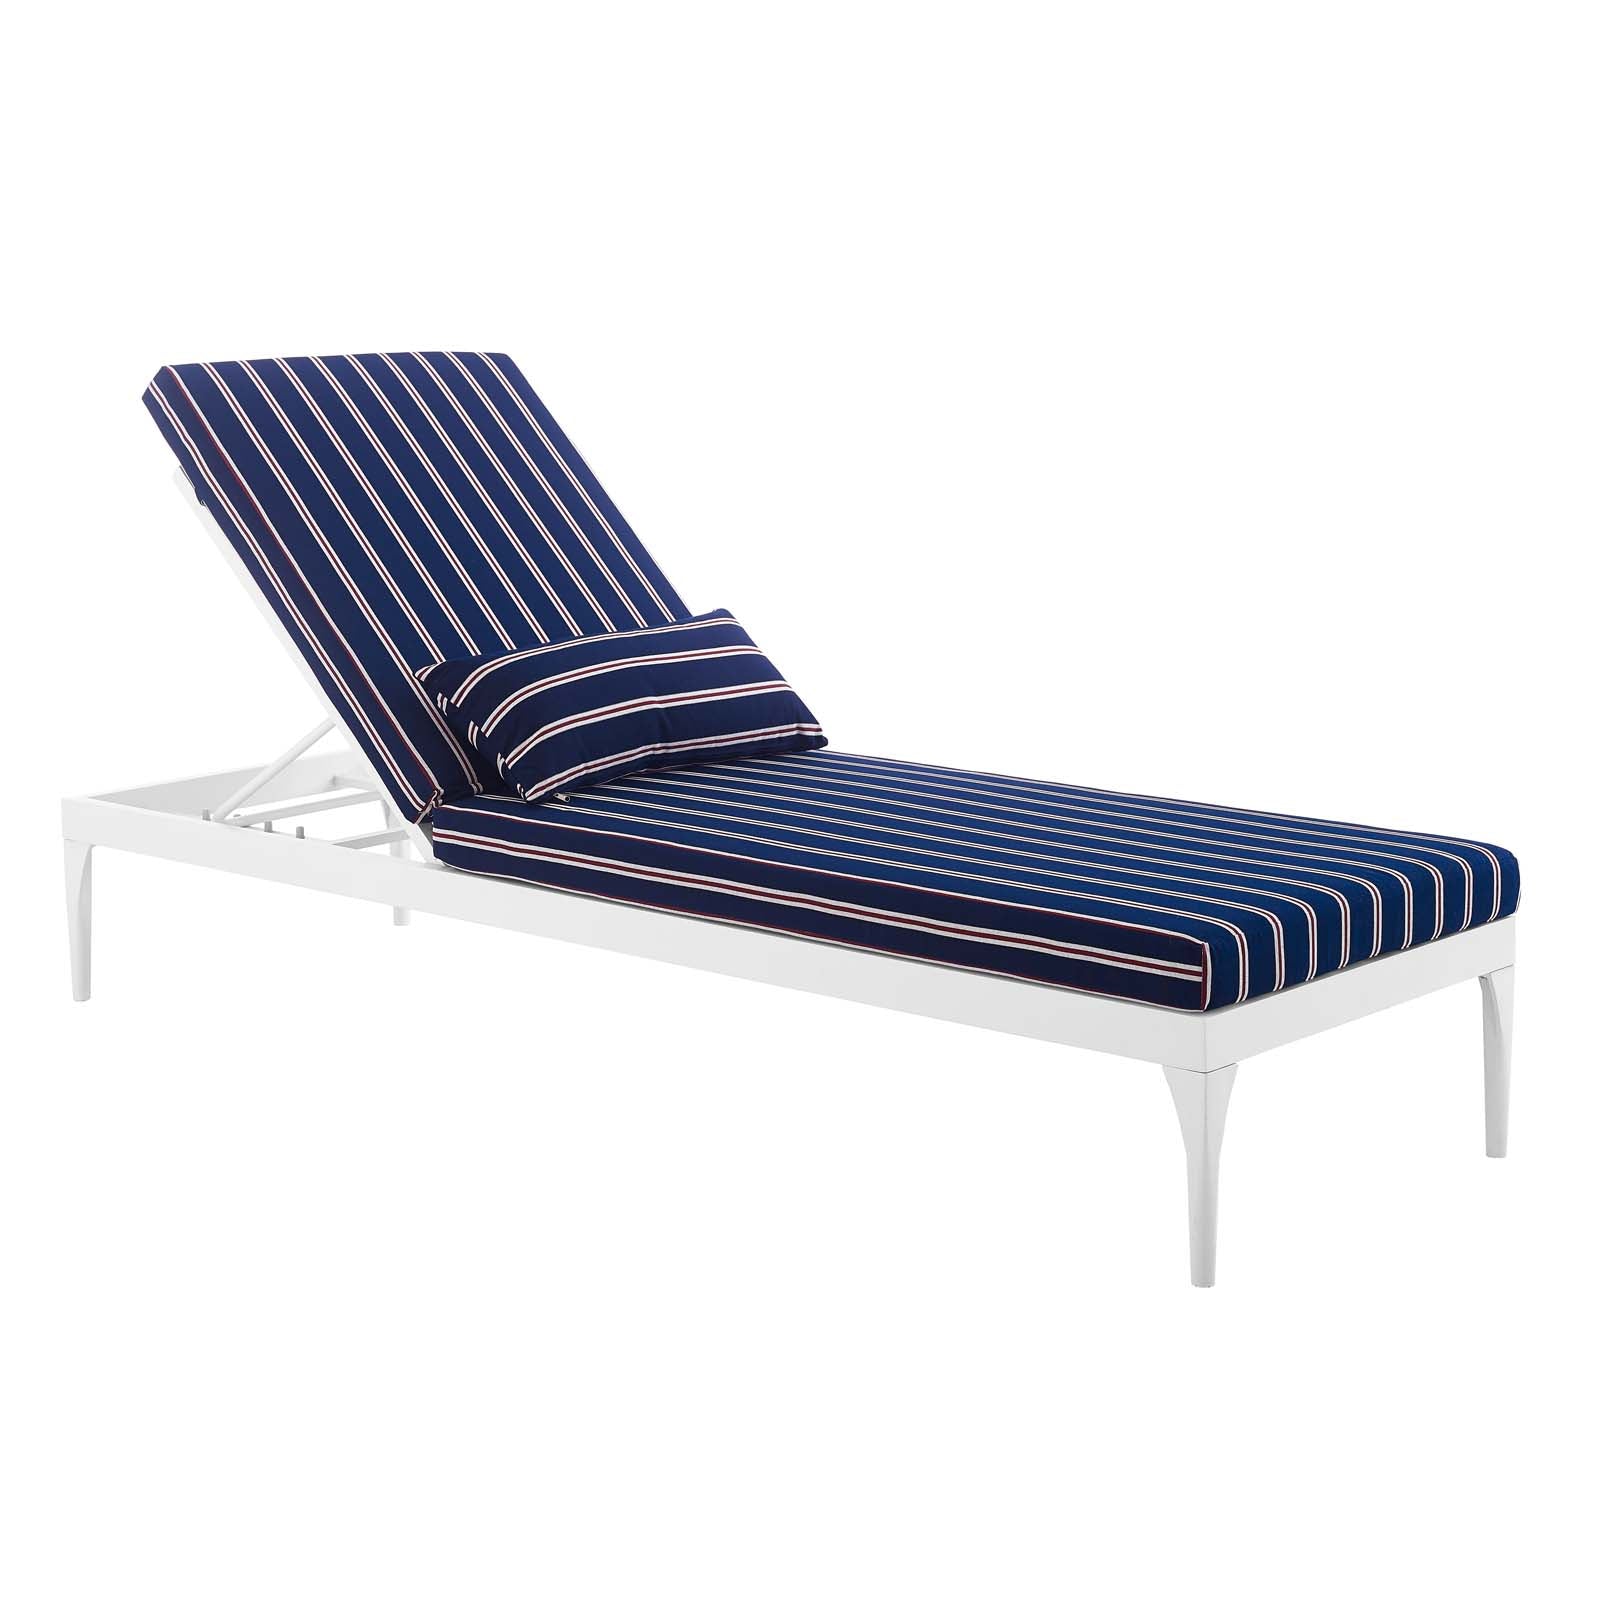 Modway Outdoor Loungers - Perspective Cushion Outdoor Patio Chaise Lounge Chair White Striped Navy